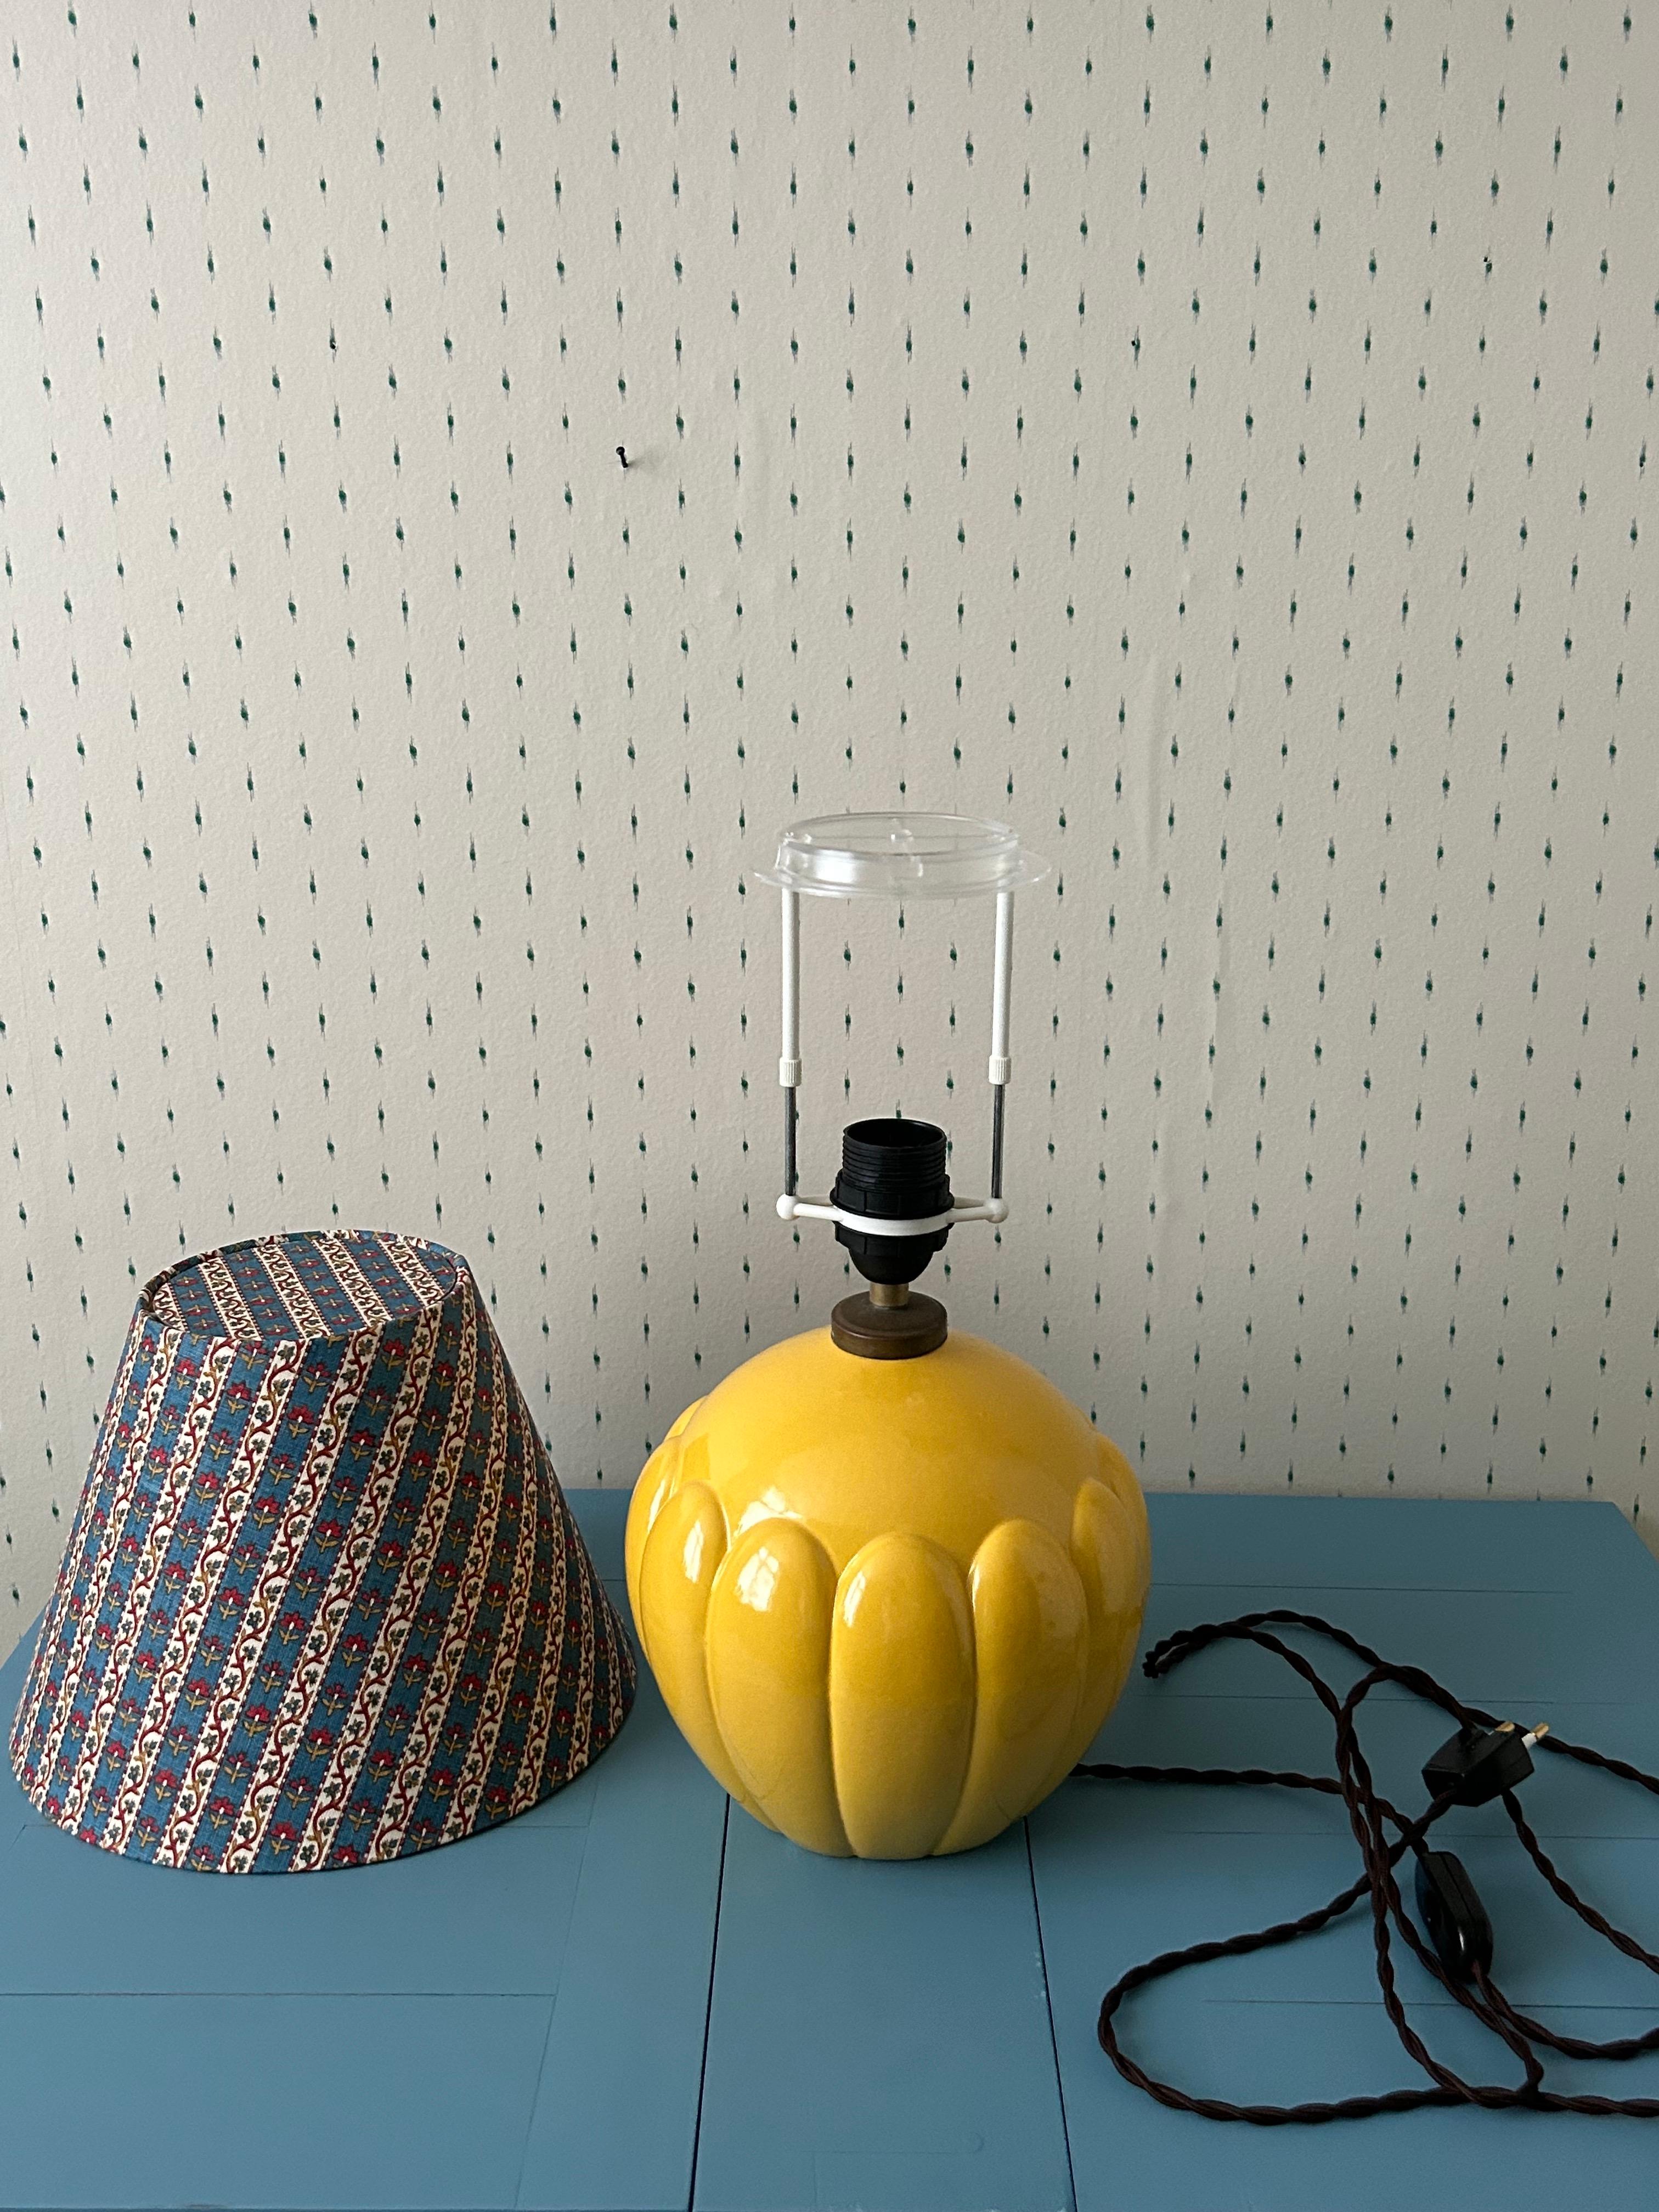 Vintage Yellow Ceramic Table Lamp with Customized Striped Shade, France, 1960s For Sale 3